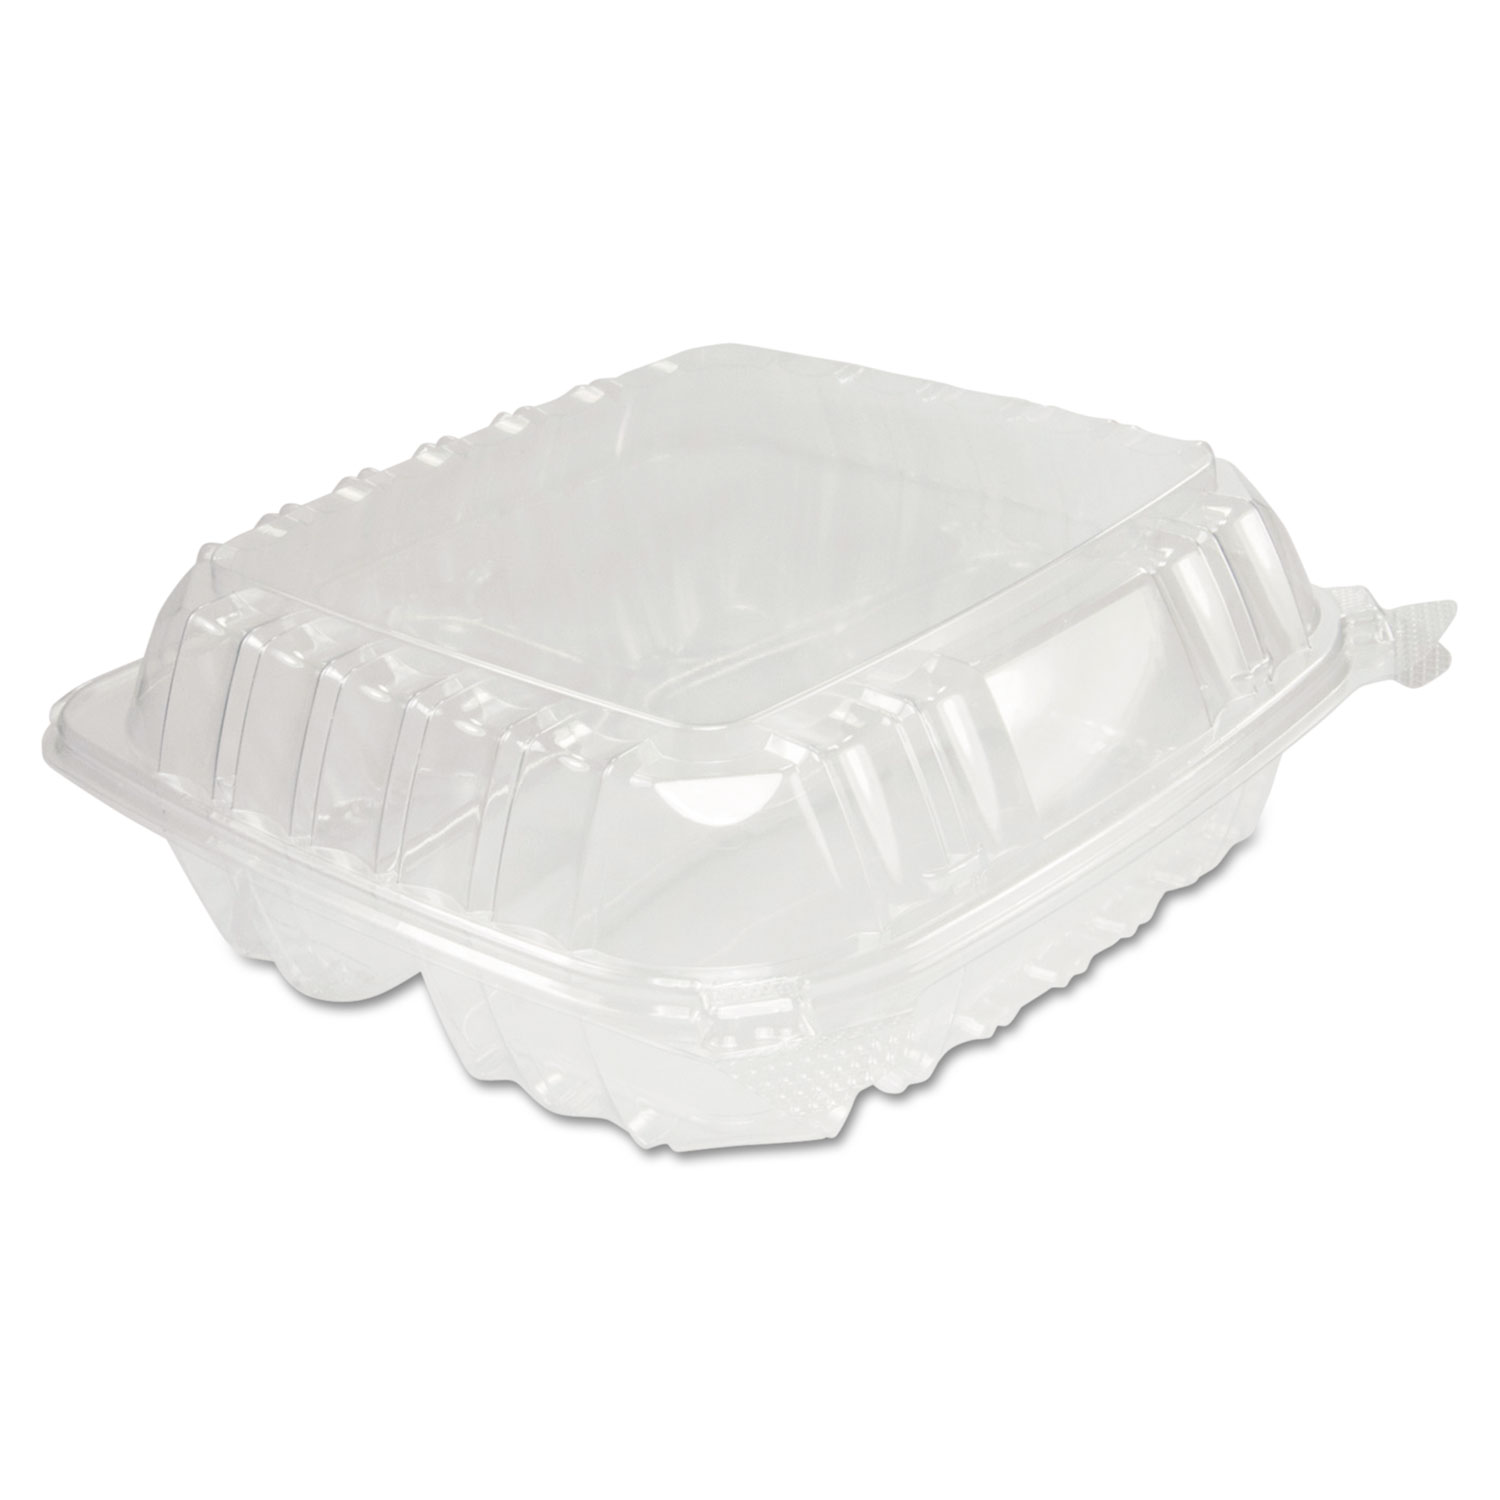  Dart C90PST3 ClearSeal Hinged-Lid Plastic Containers, 8 1/4 x 3 x 8 1/4, Clear 125/PK 2 PK/CT (DCCC90PST3) 